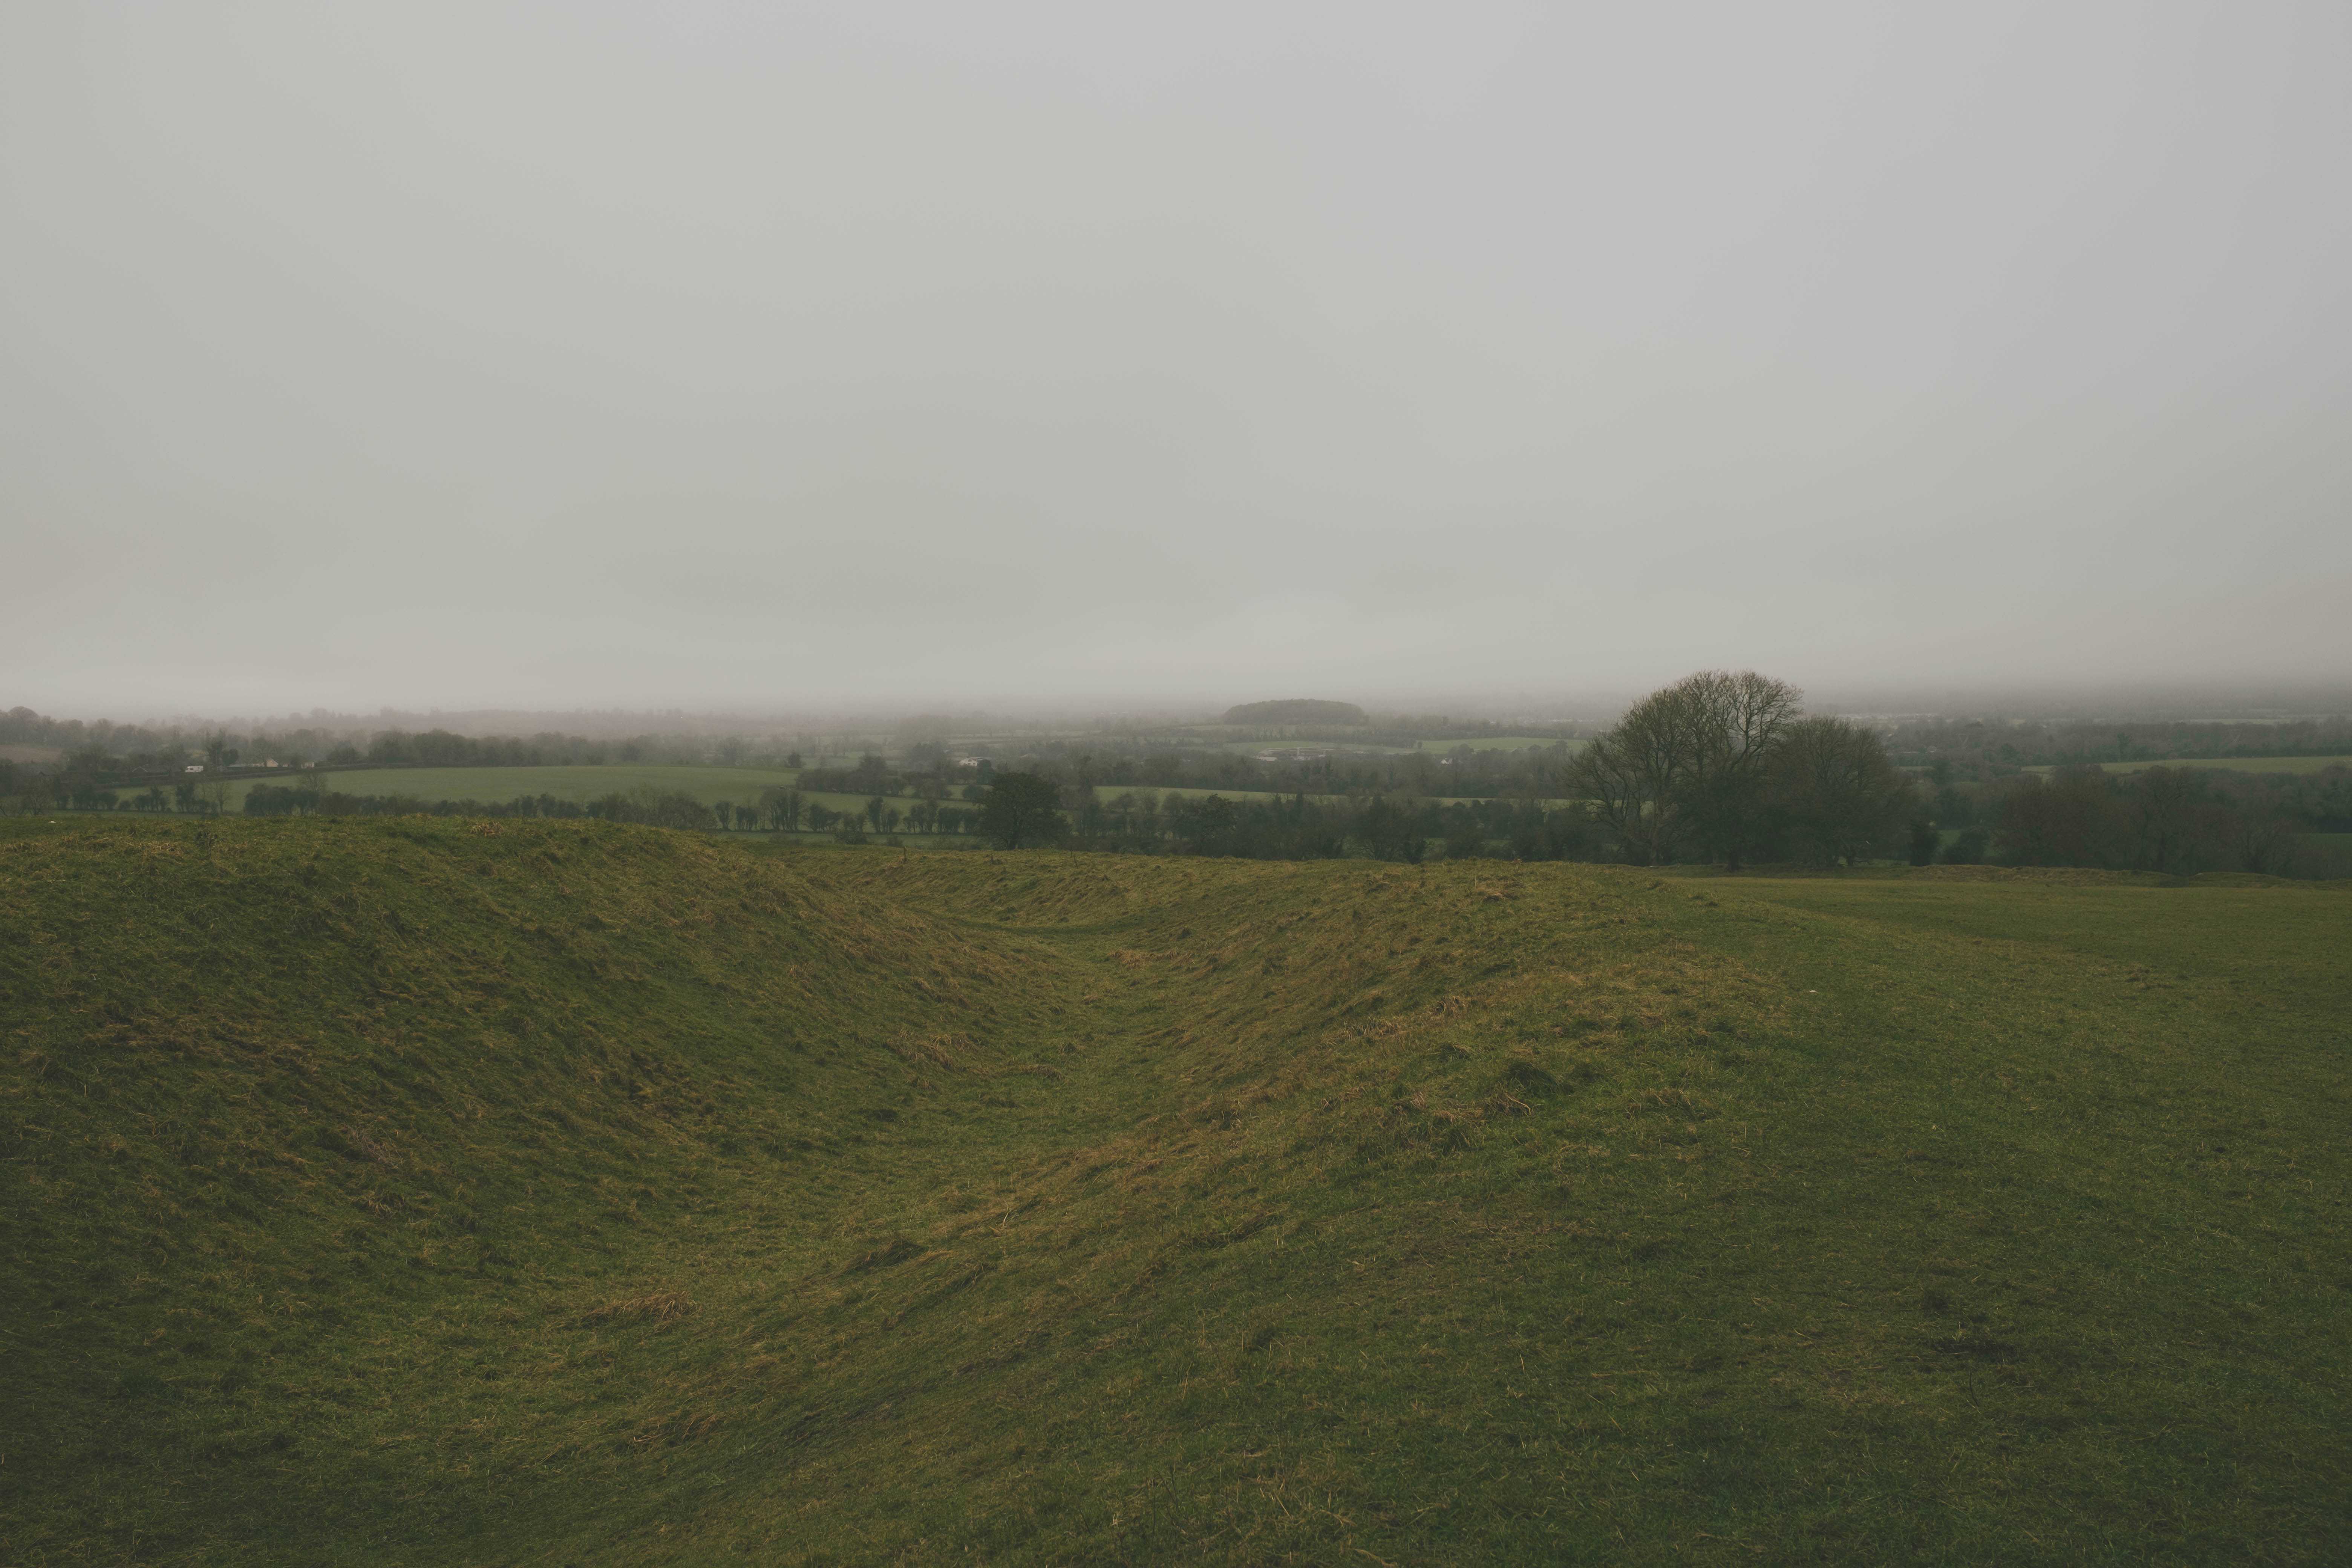 Recess in the mounds of the Hill of Tara, looking over the countryside on a cloudy, misty day